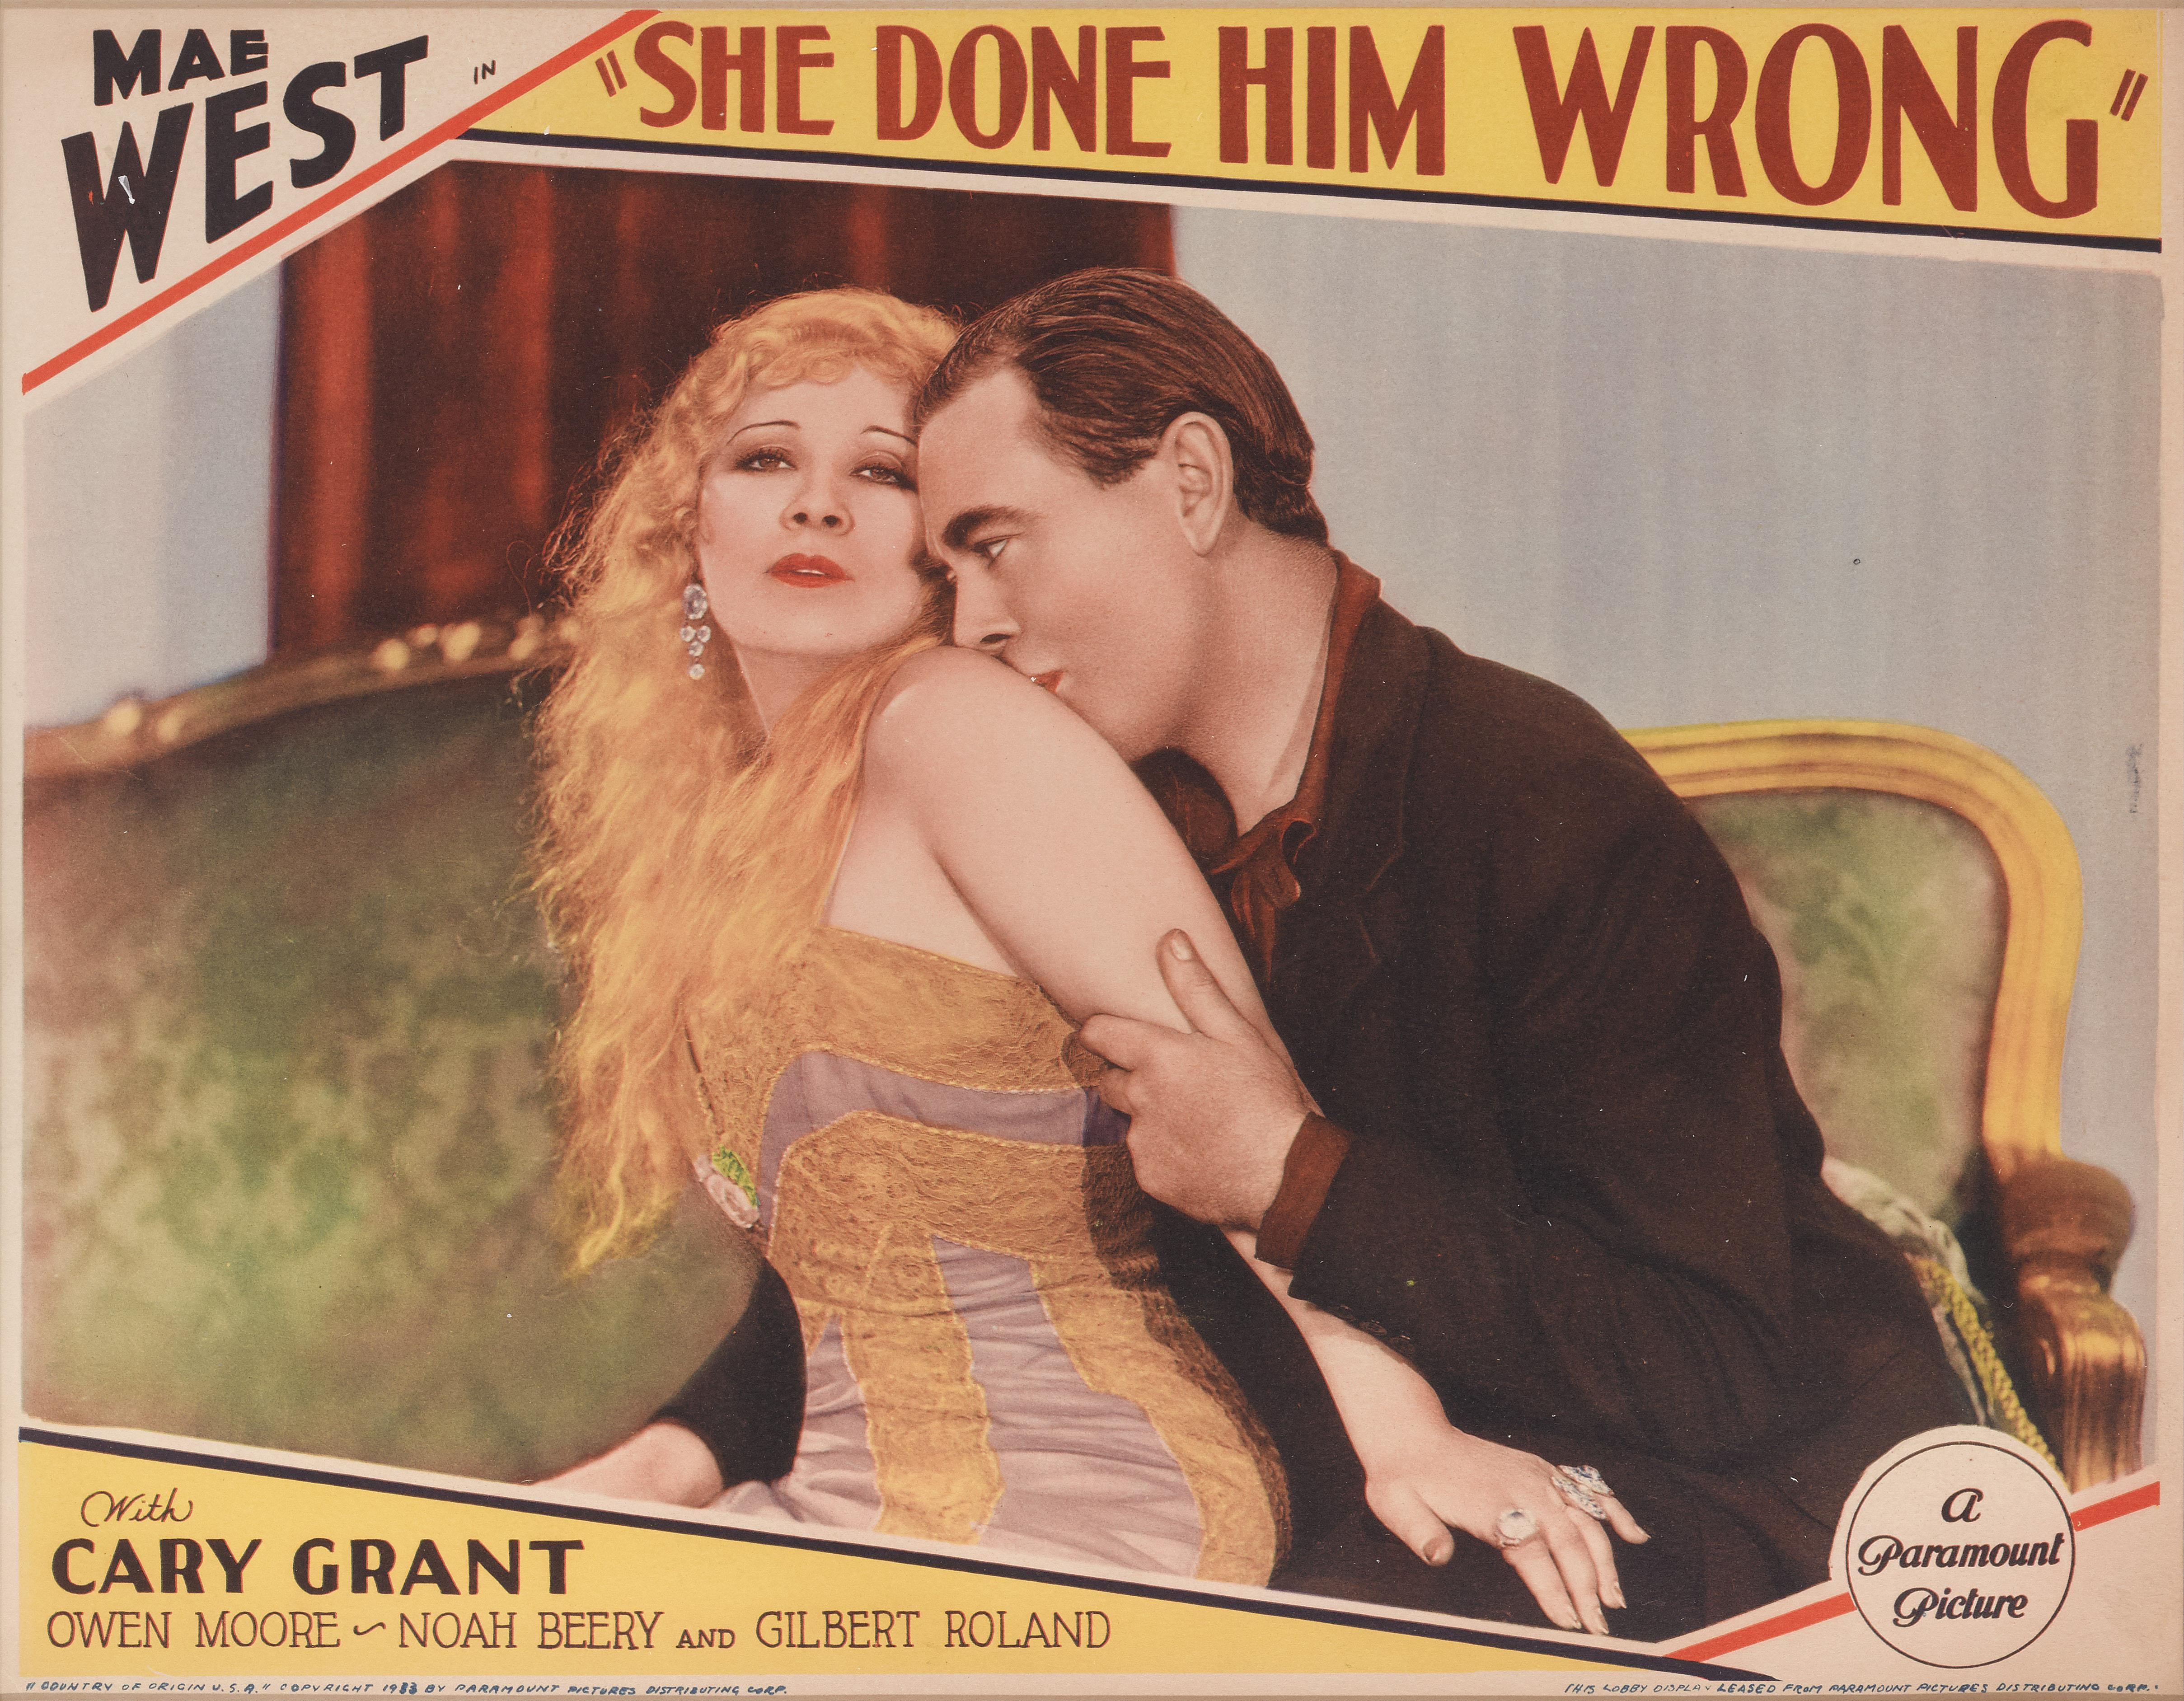 Original US lobby card for the 1933 comedy romance She Done Him Wrong.
This film starred May West and Cary Grant and was directed by Lowell Sherman.
This lobby card is conservation framed with UV plexiglass in an Obeche wood frame with card mounts